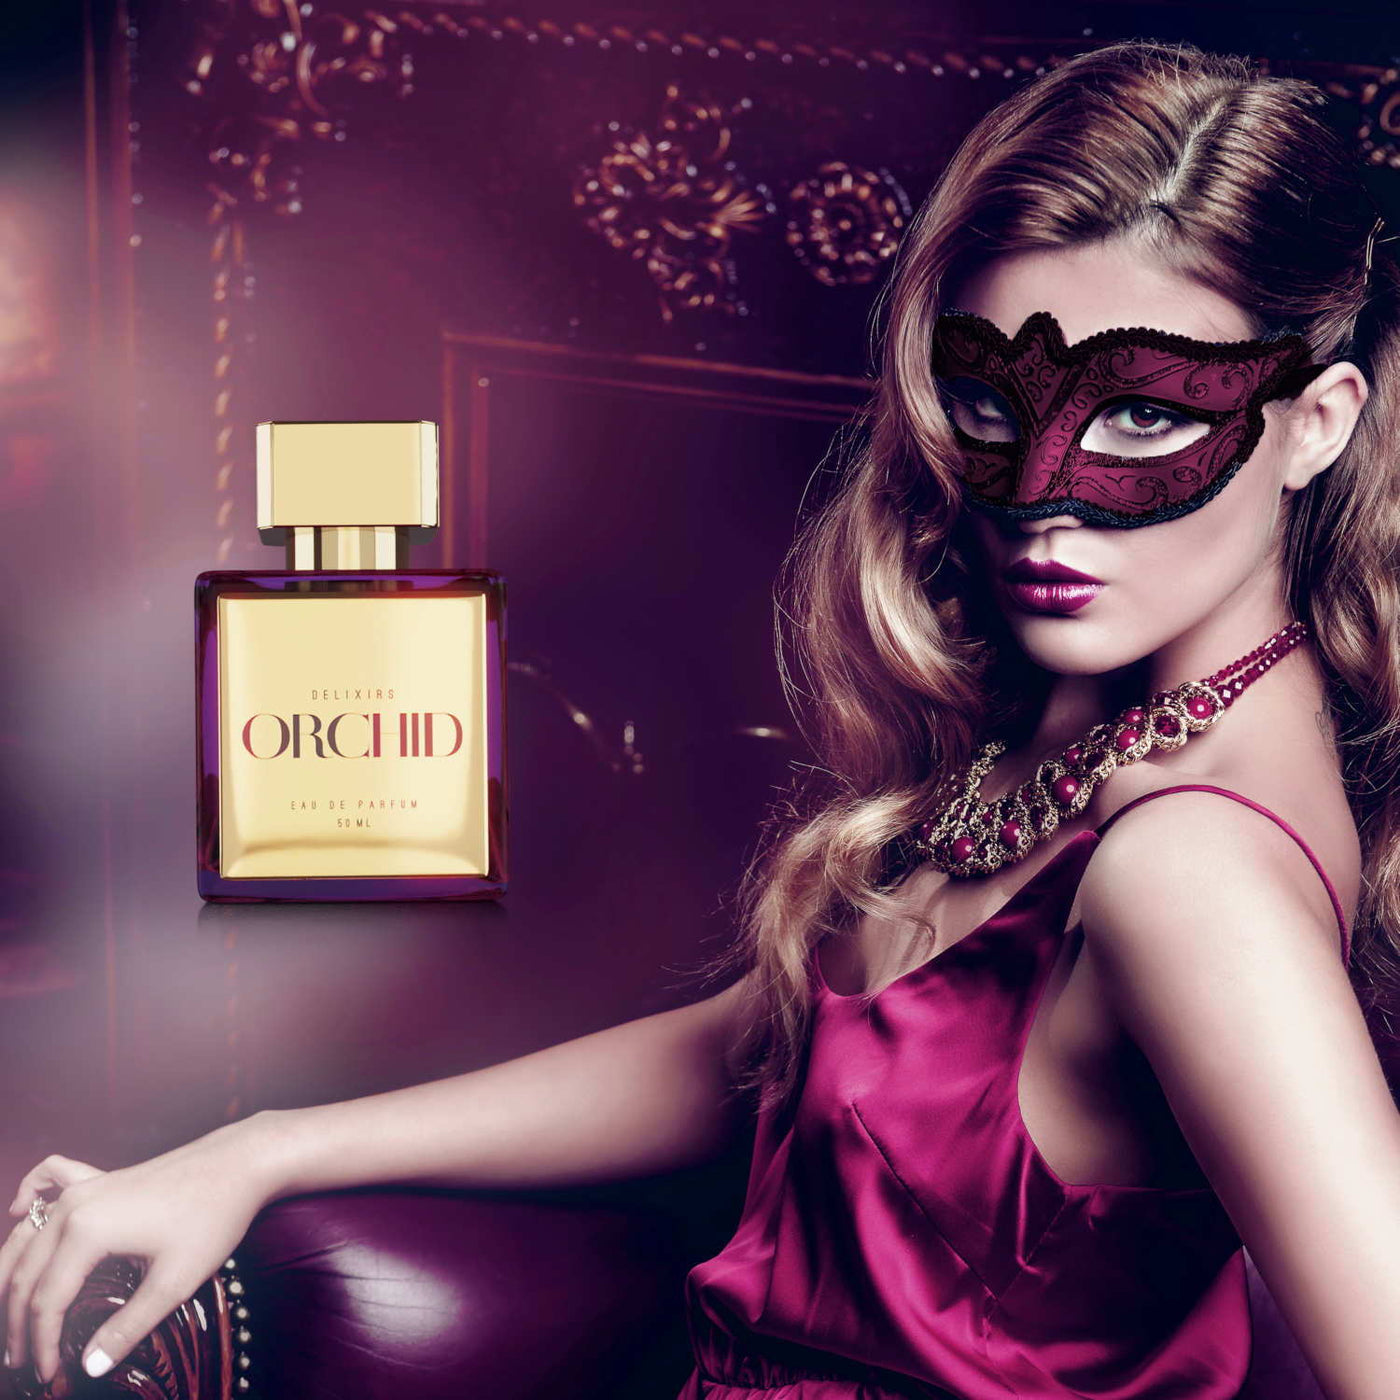 Orchid Perfume